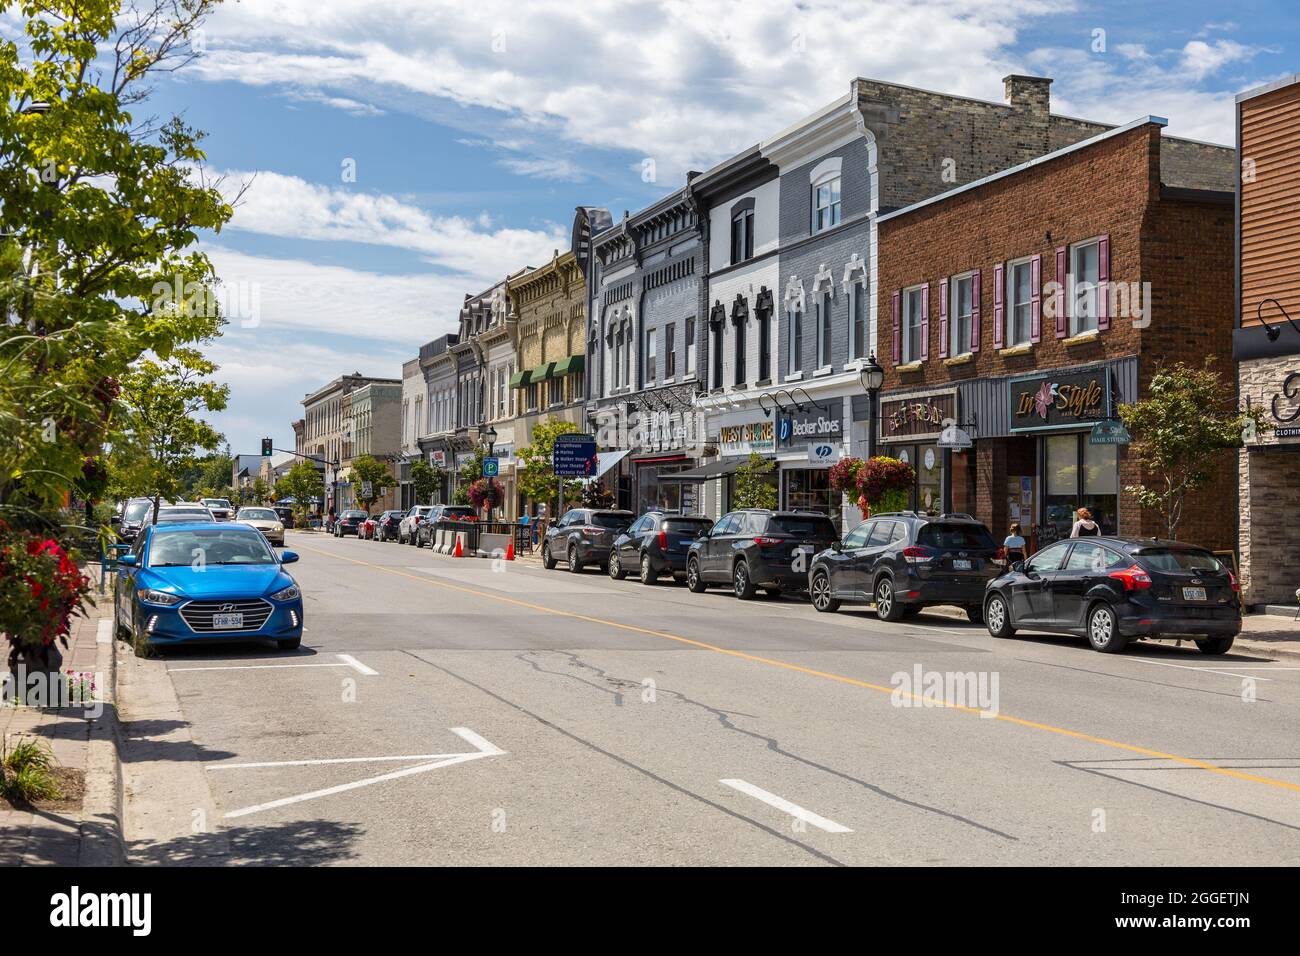 Queen Street In Historic Downtown Kincardine Ontario Canada The Main Shopping Street In The Town Centre. Historic Buildings Shops And Stores On Street Stock Photo